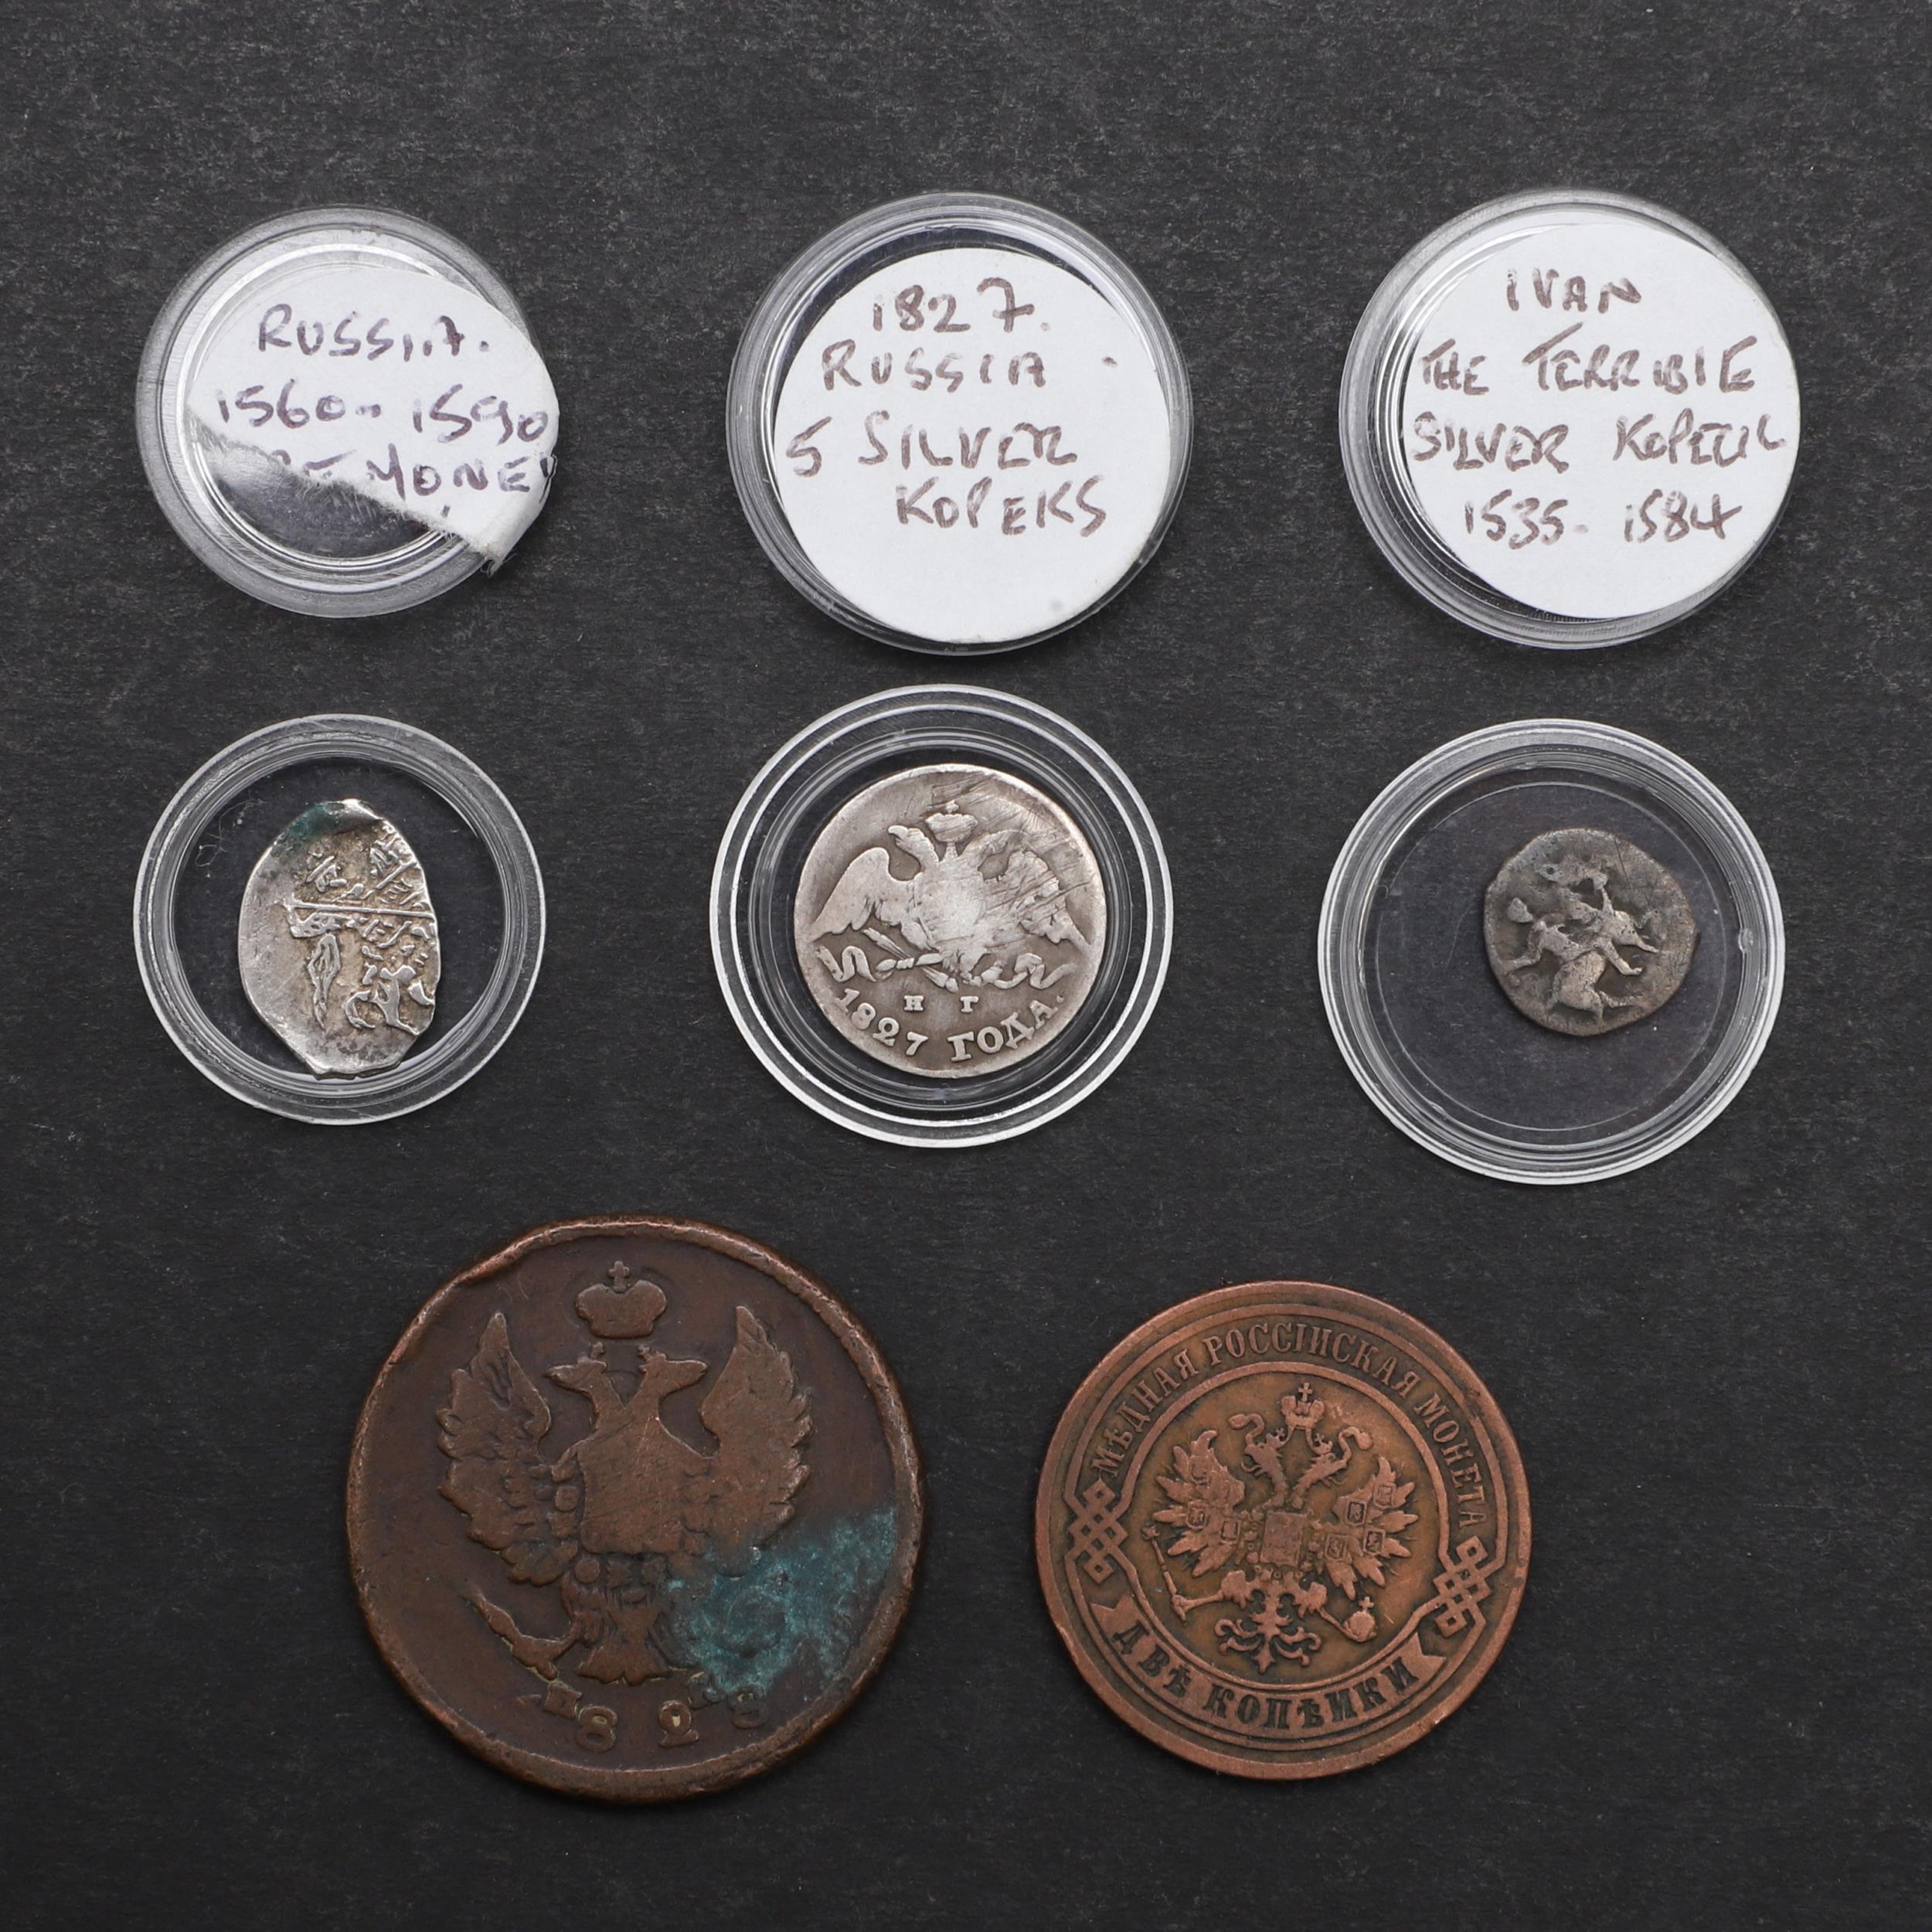 A SMALL COLLECTION OF FIVE RUSSIAN COINS.